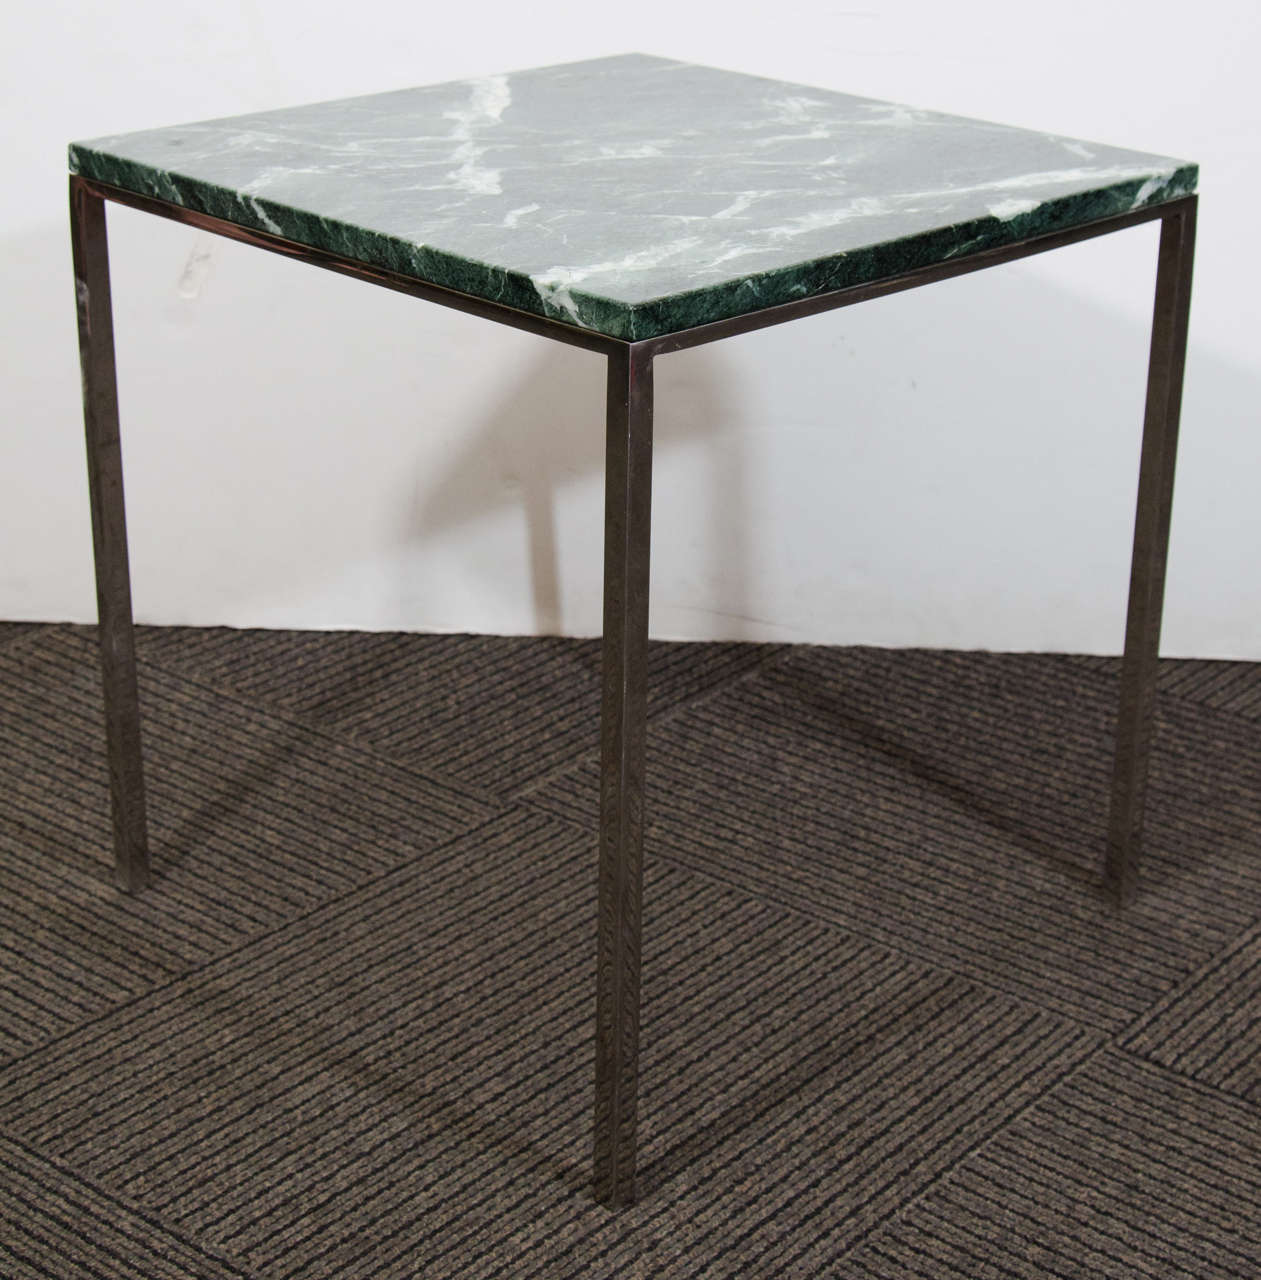 A mid century small square side table by Florence Knoll with a chrome base and a green marble top. This table was purchased from Chase Bank, and is signed Chase Bank on the underside of the marble. The chrome base is thinner under the marble than